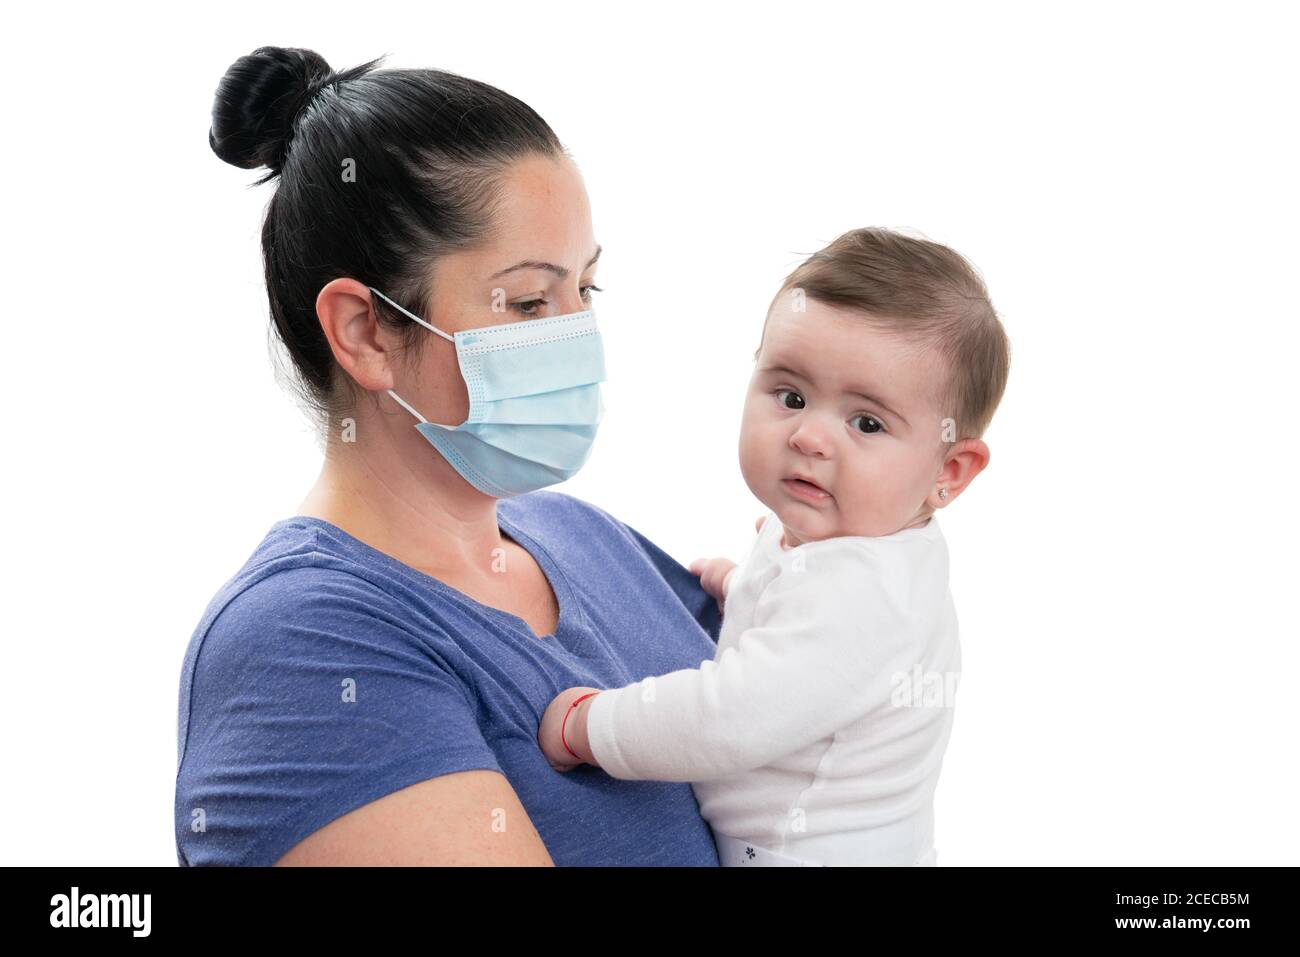 Female model as mother wearing disposable medical or surgical mask preventing covid19 sars flu coronavirus contamination holding baby girl isolated on Stock Photo